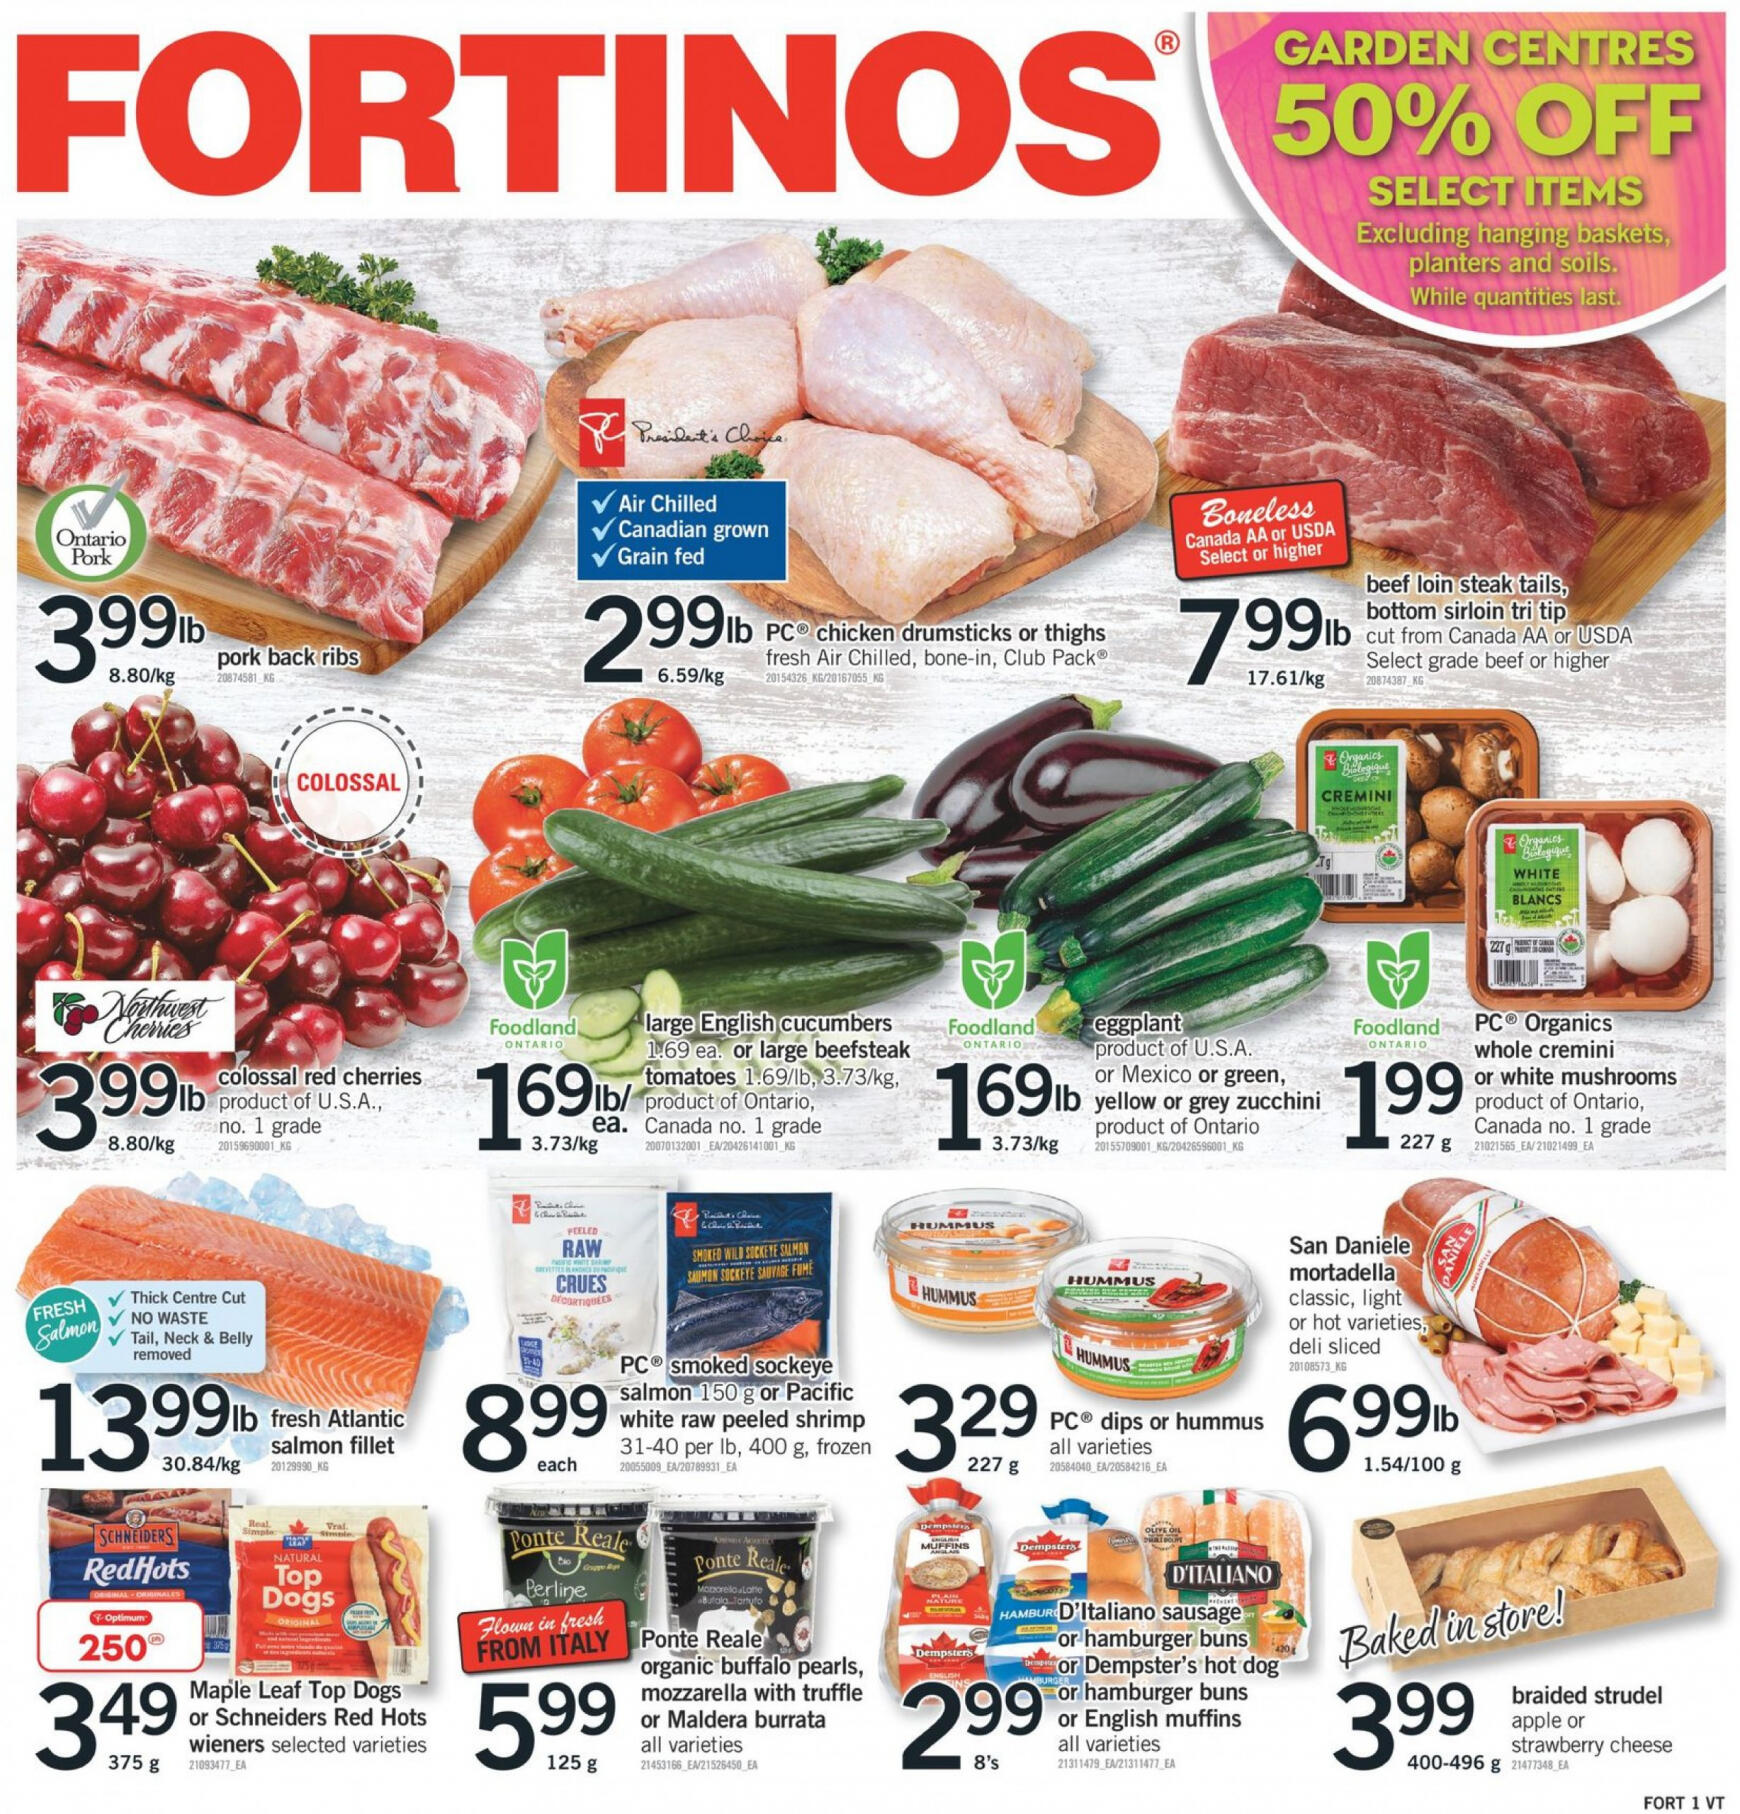 fortinos - Fortinos flyer current 20.06. - 26.06.